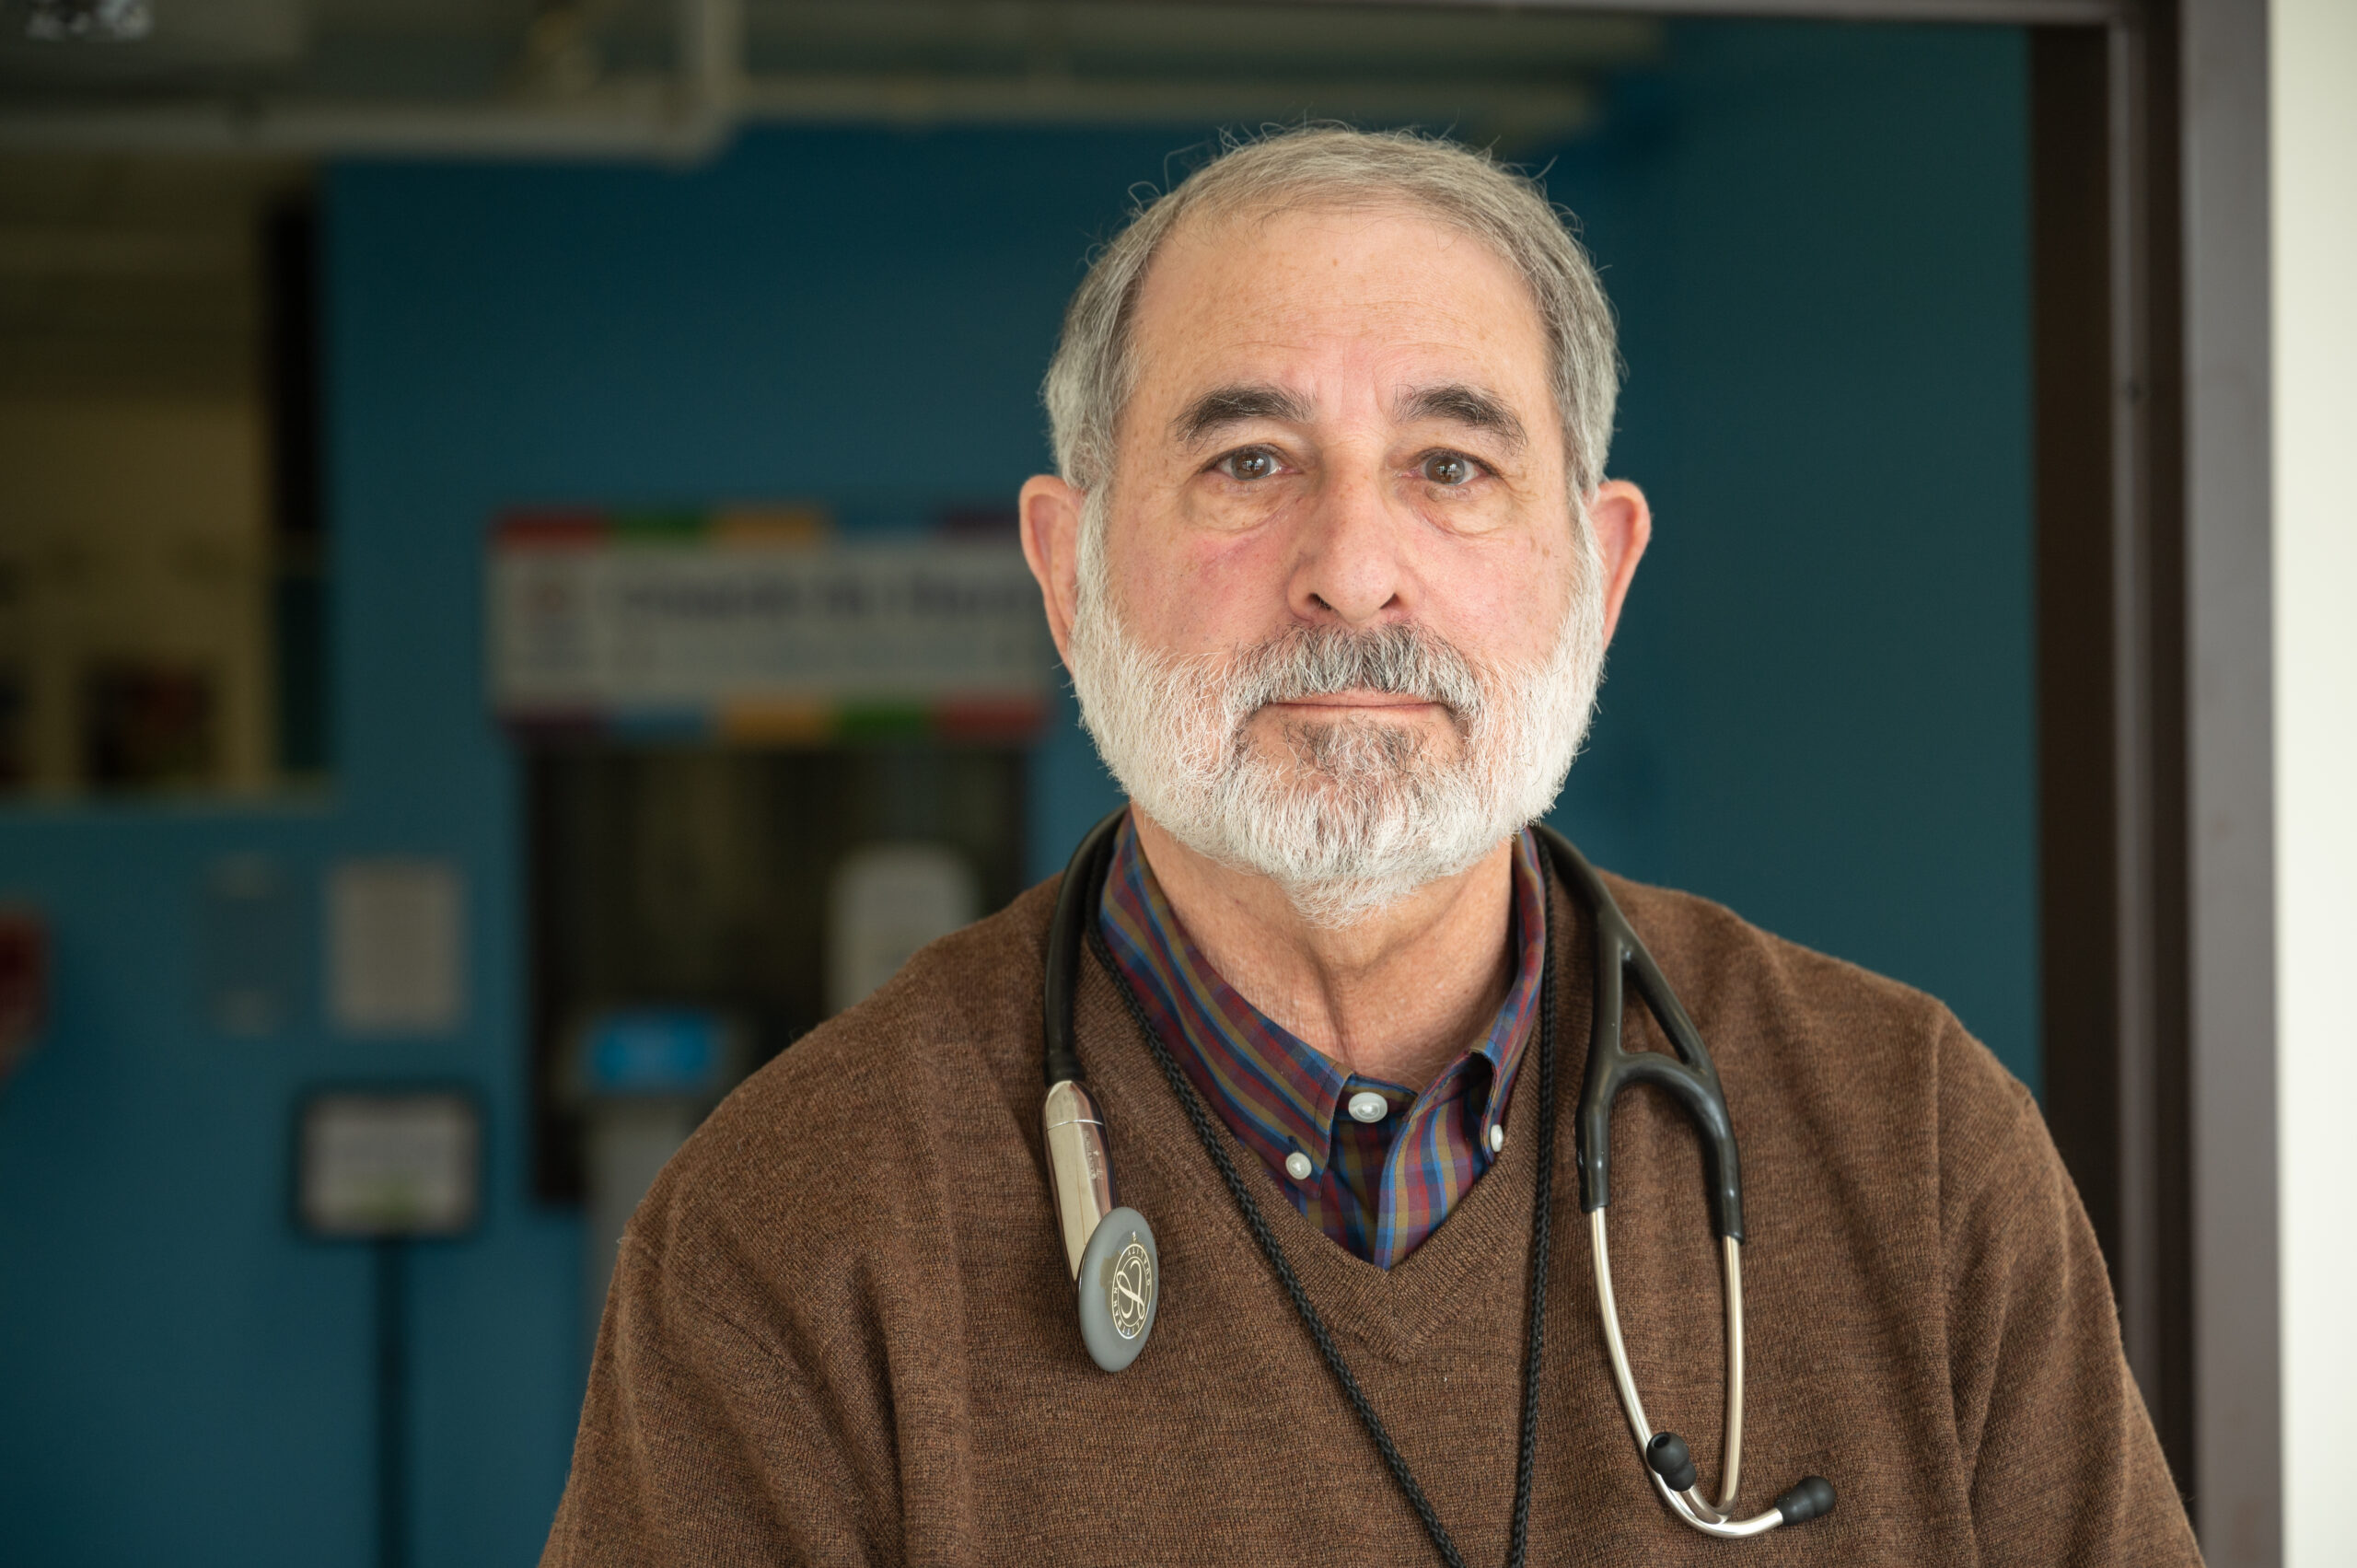 A doctor with a brown sweater stands in front of an emergency room